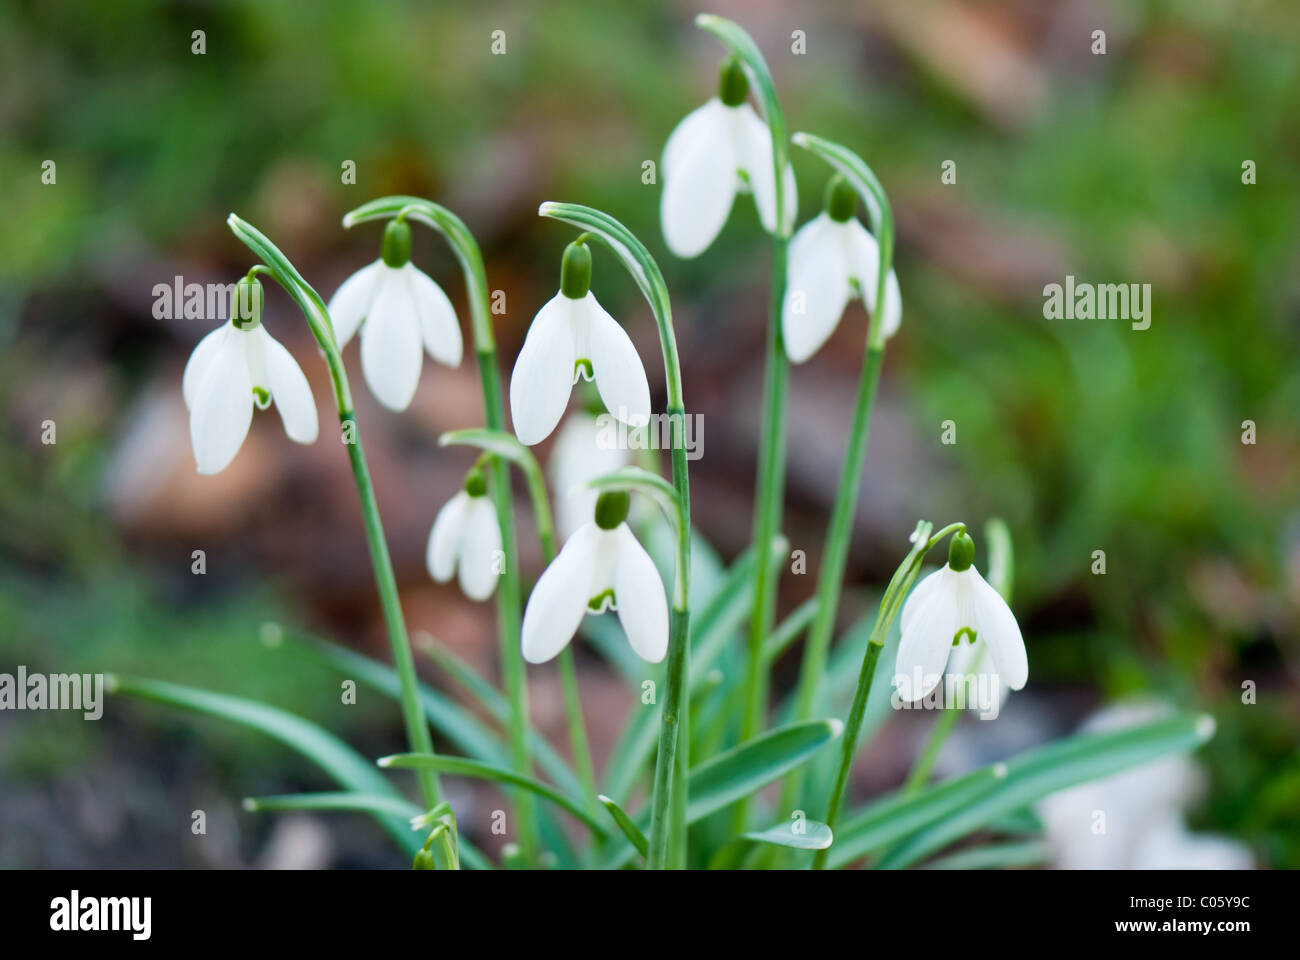 Snowdrops or galanthus Stock Photo